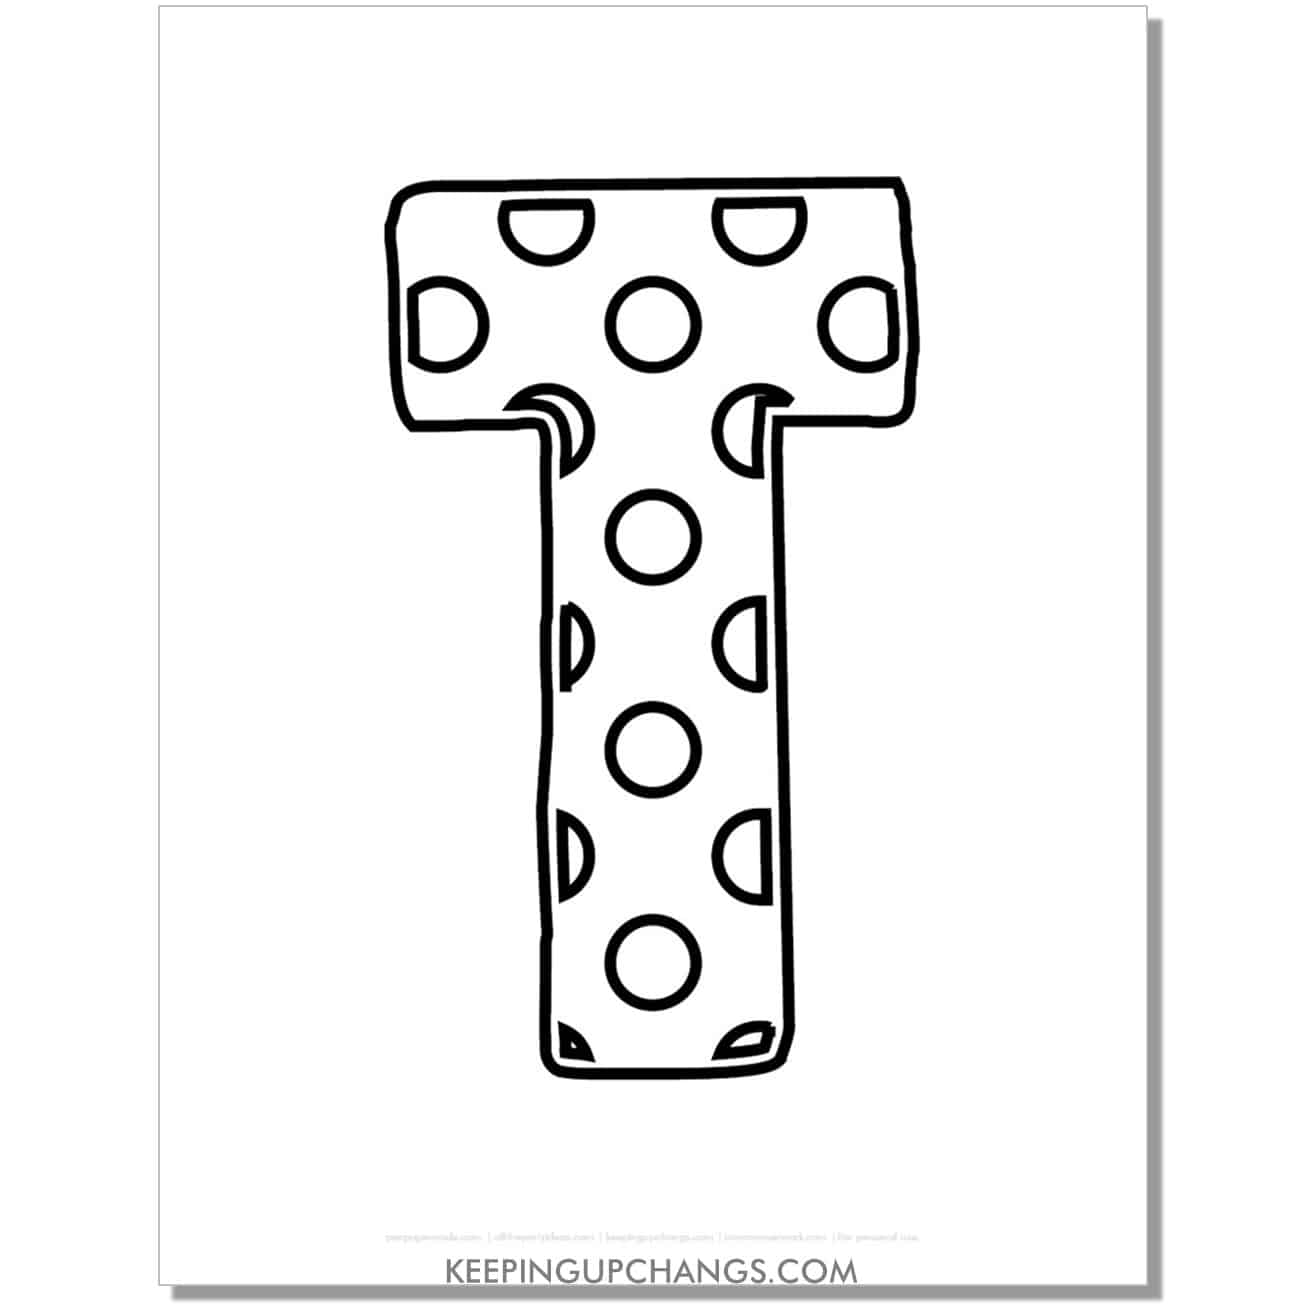 free alphabet letter t coloring page with polka dots for toddlers, preschool, kindergarten.